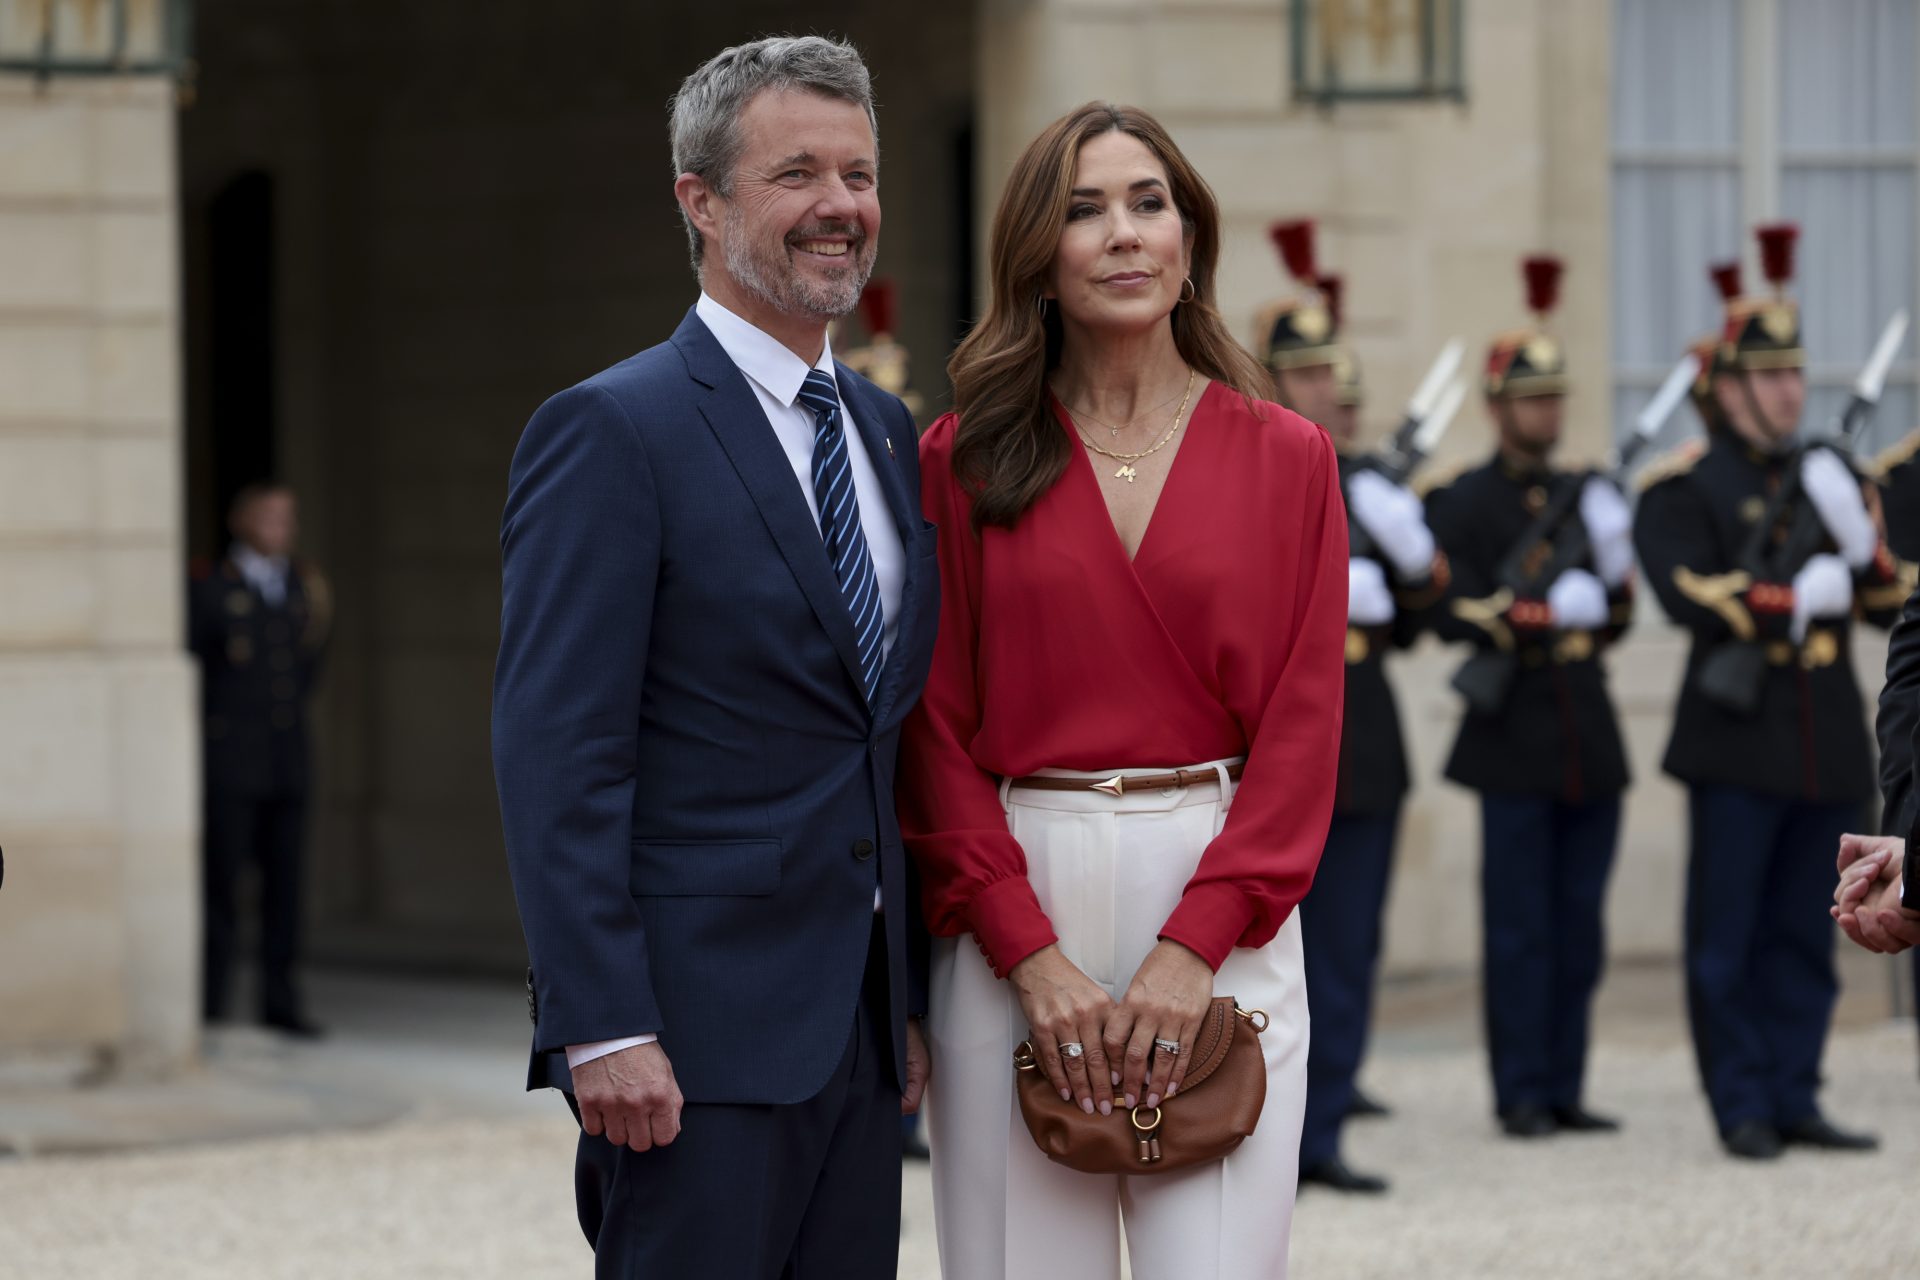 King and Queen of Denmark